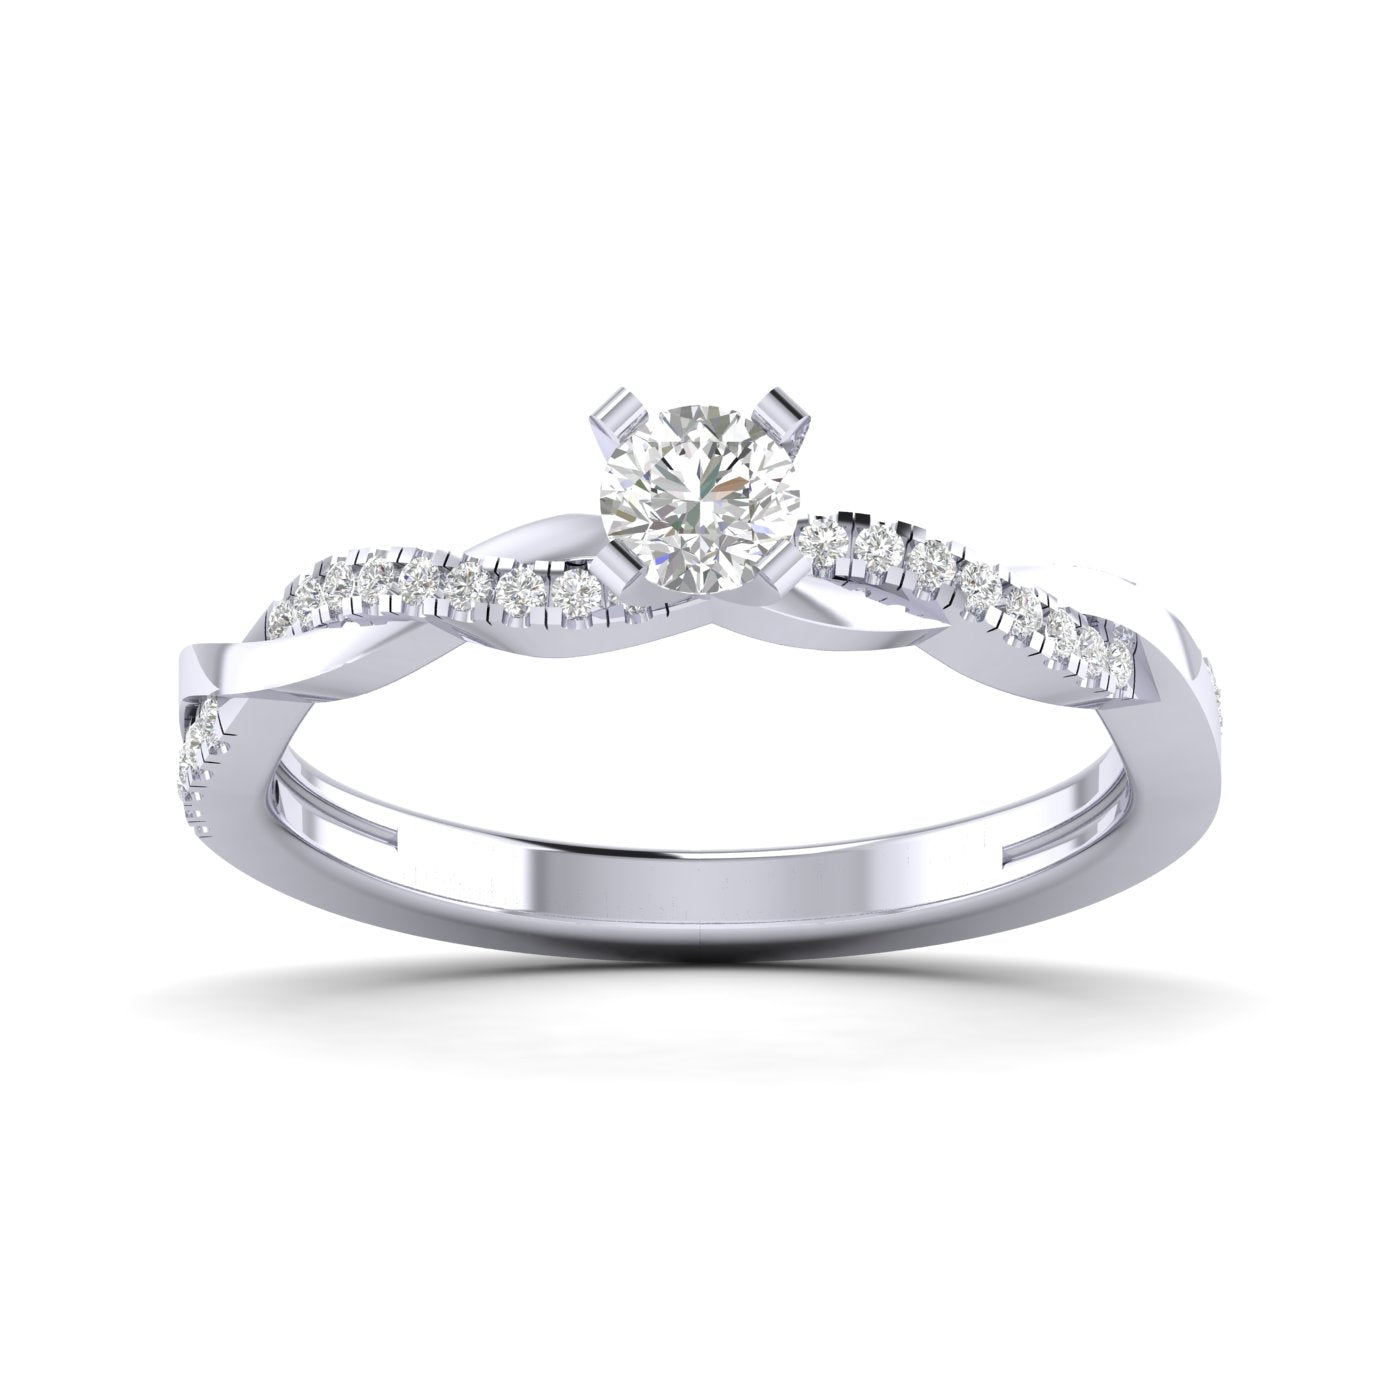 Swirling Solitaire Diamond Ring